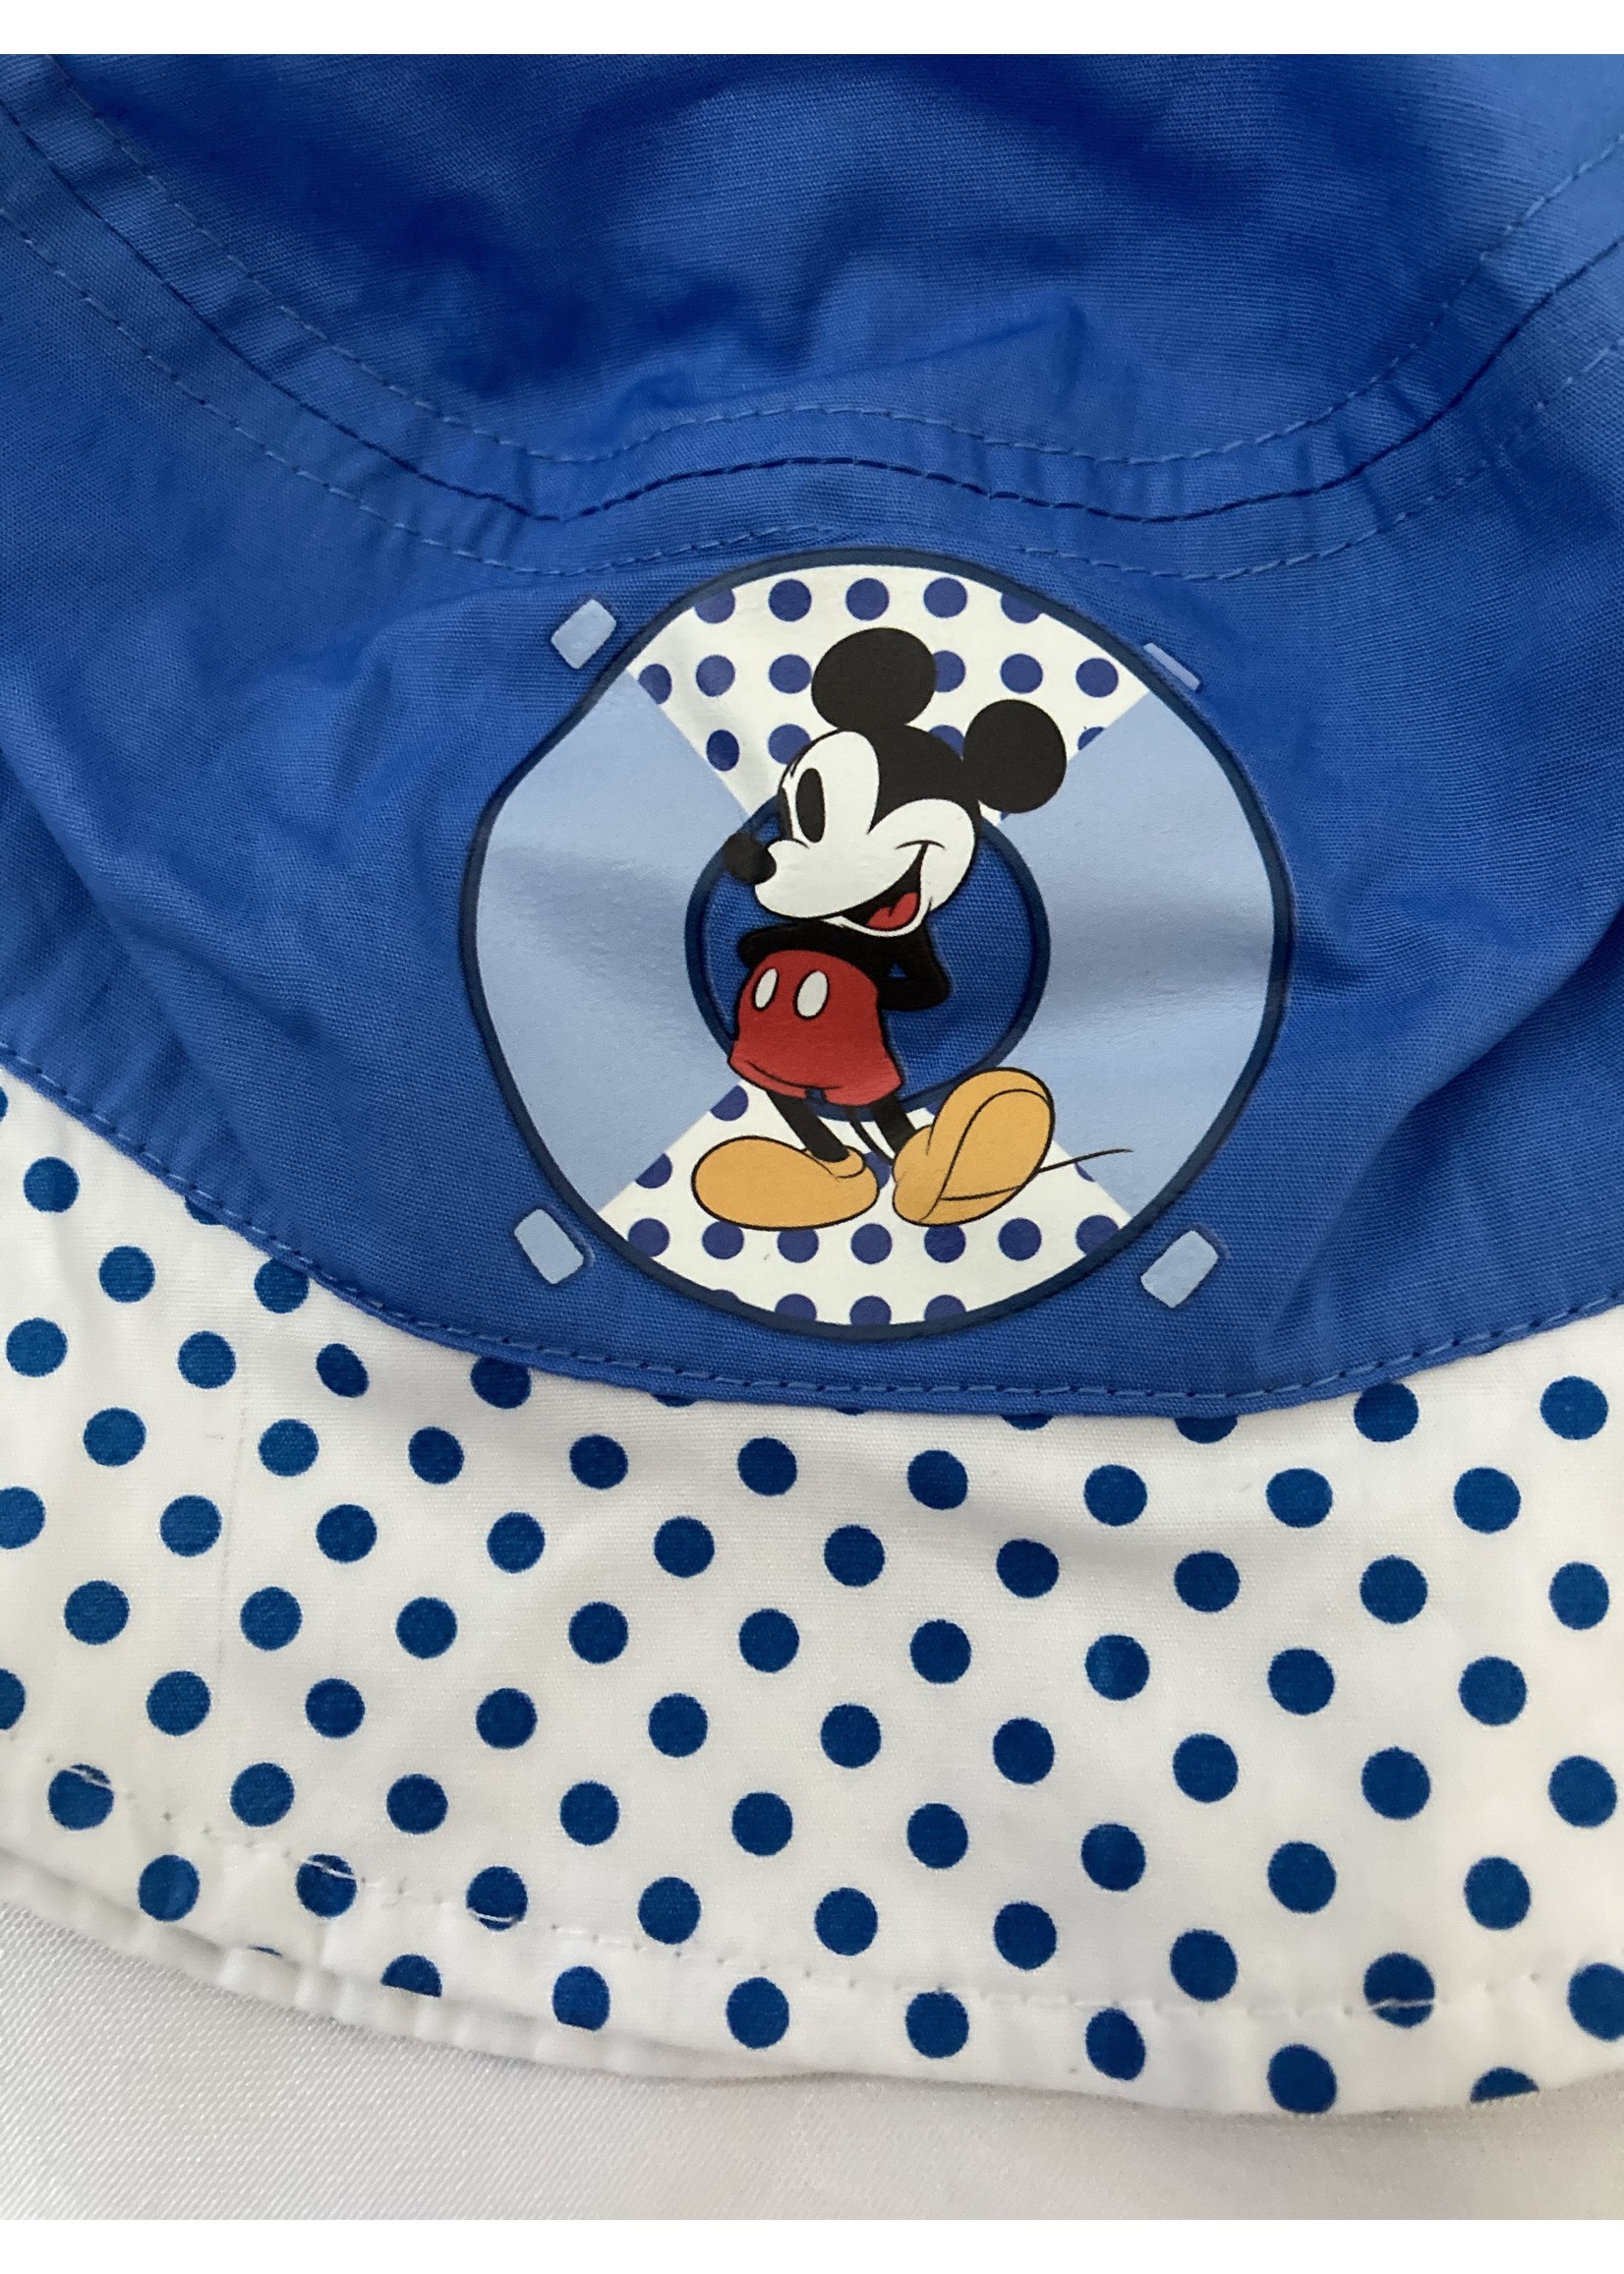 Disney baby Mickey Mouse sun hat from Disney blue